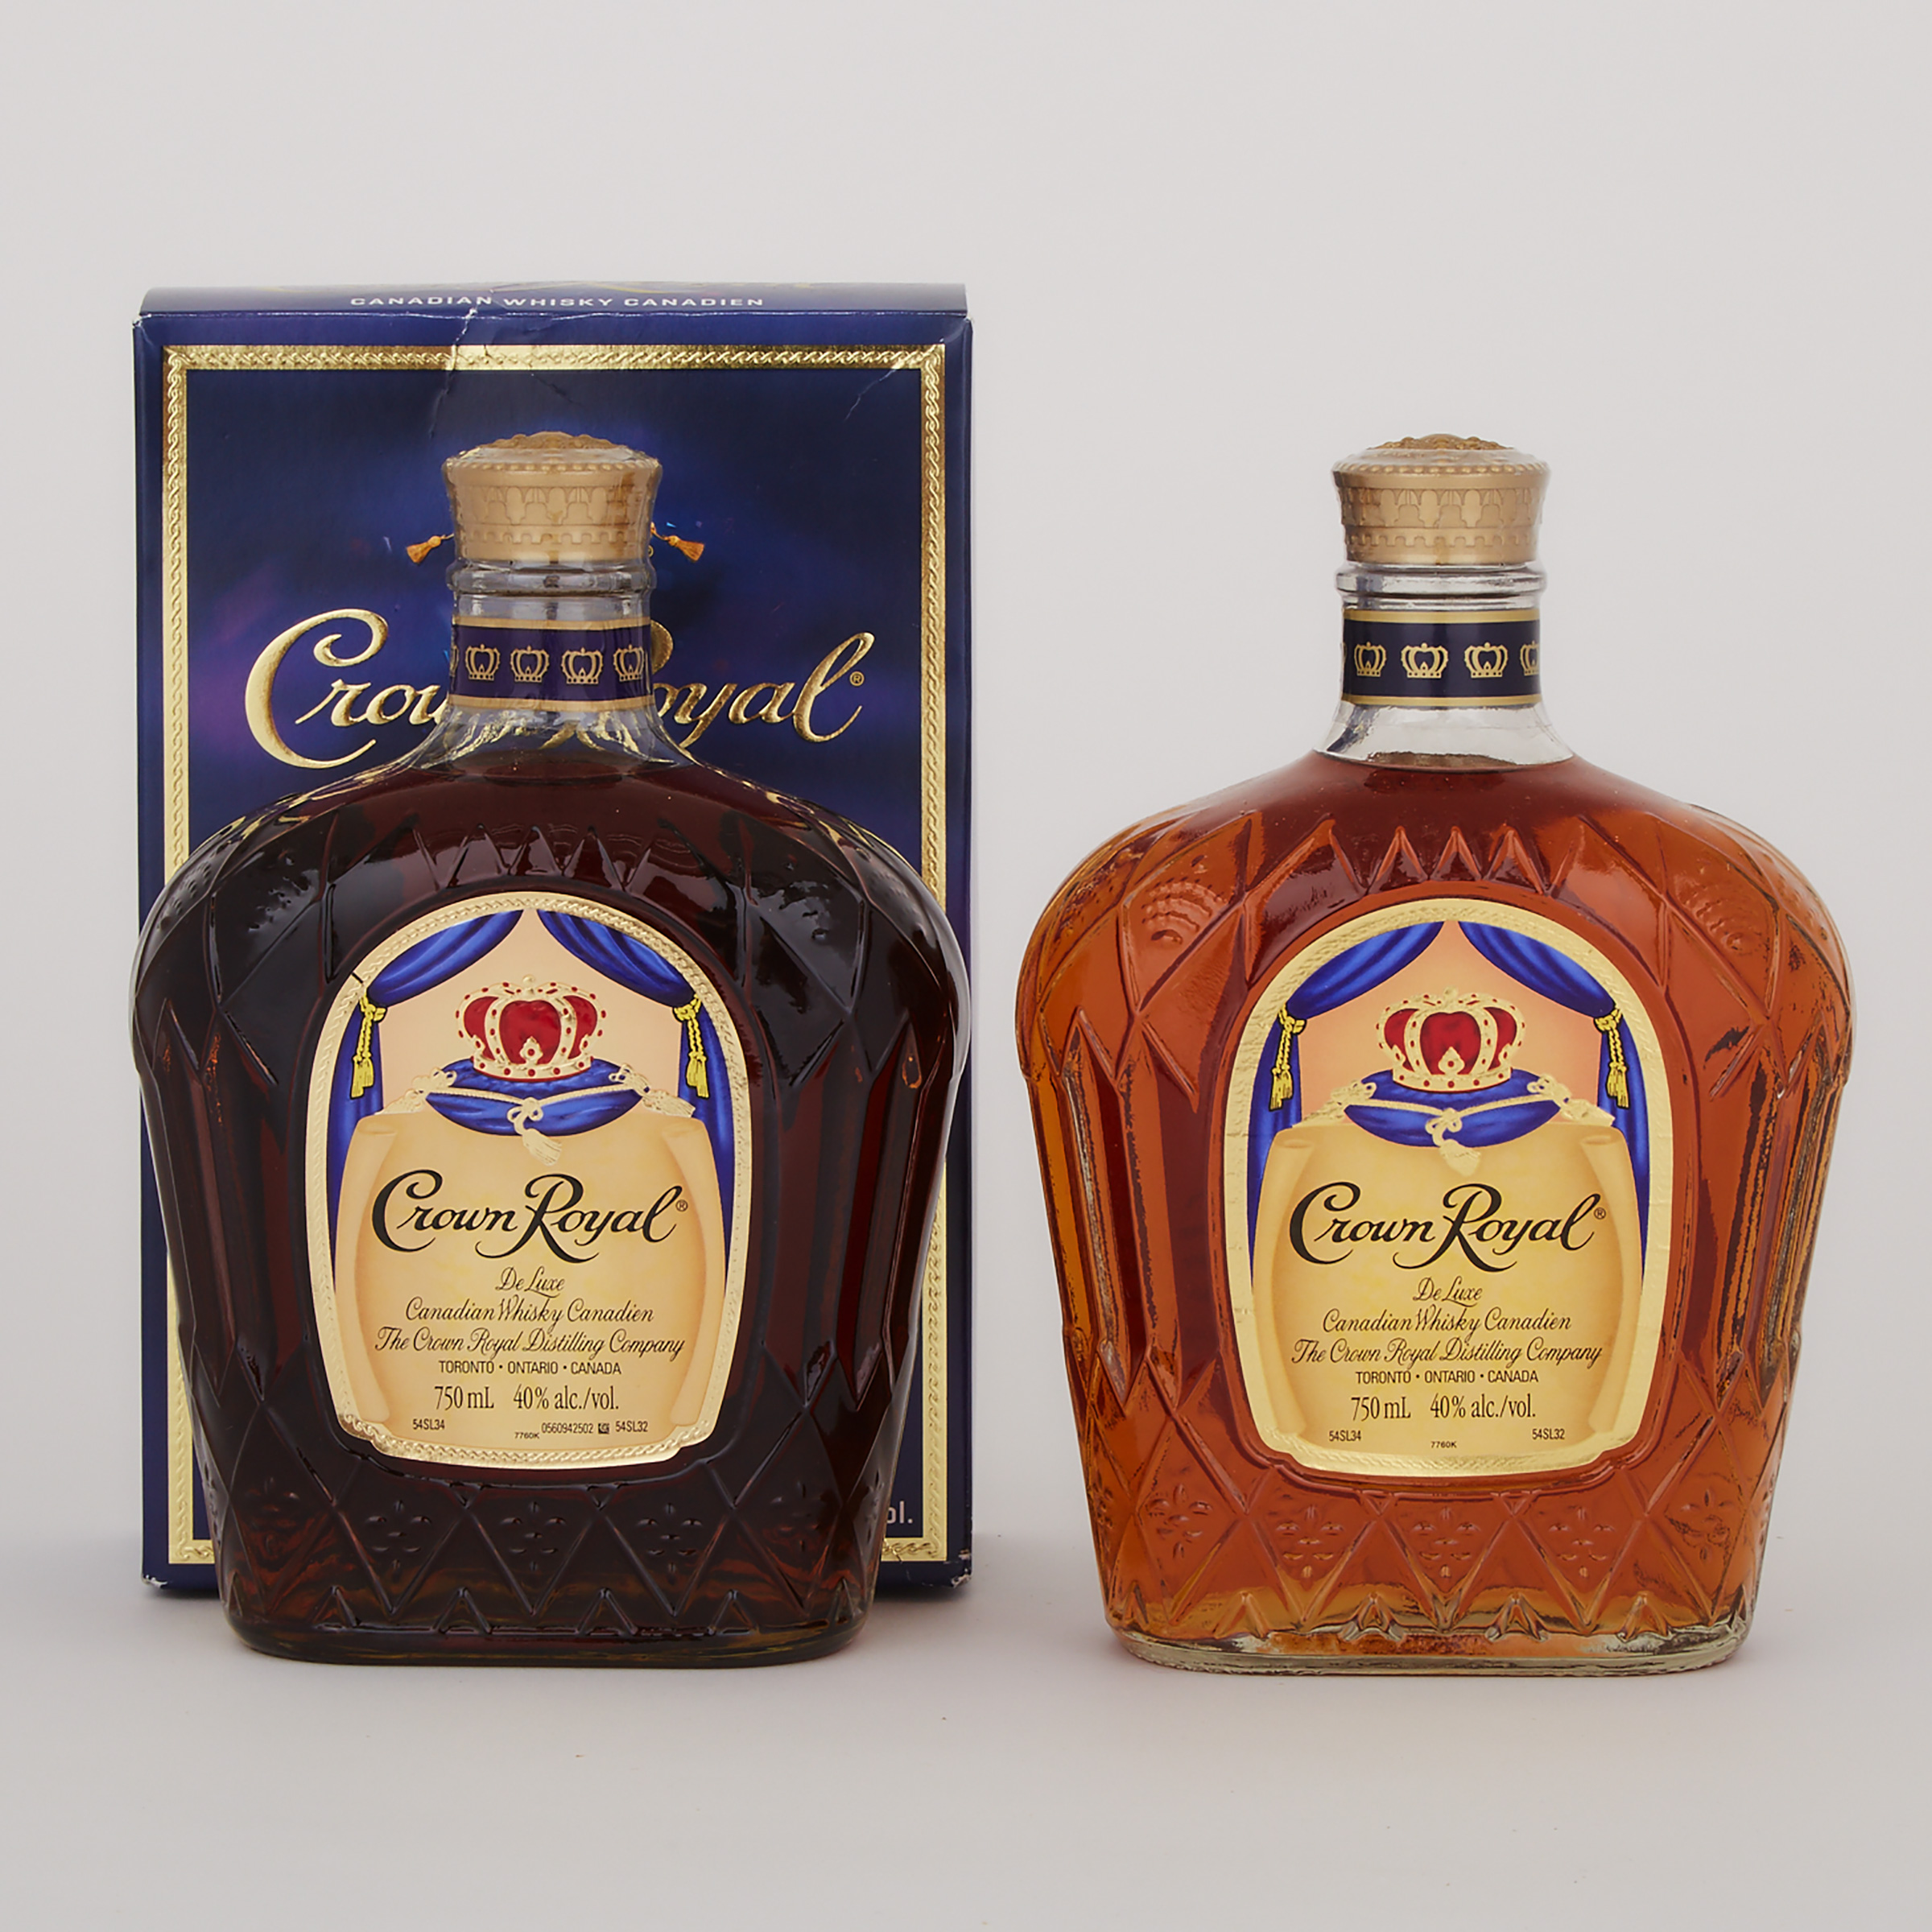 CROWN ROYAL DELUXE CANADIAN WHISKY (ONE 750 ML)
CROWN ROYAL DELUXE CANADIAN WHISKY (ONE 750 ML)